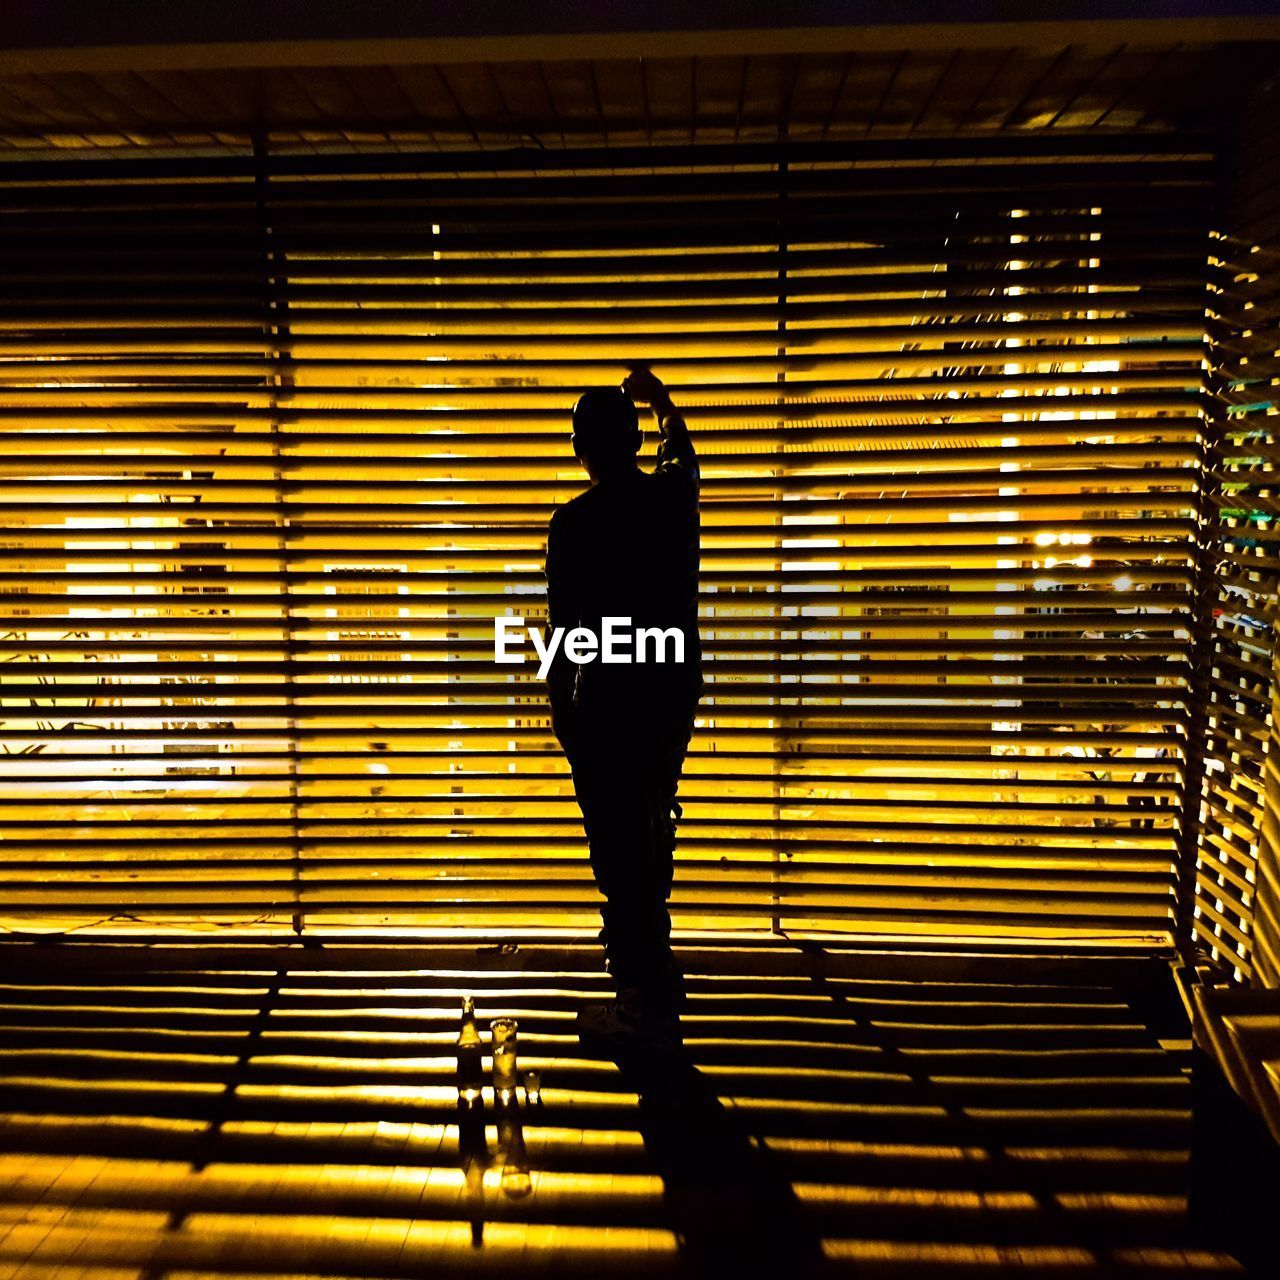 Rear view of silhouette man looking through window blinds